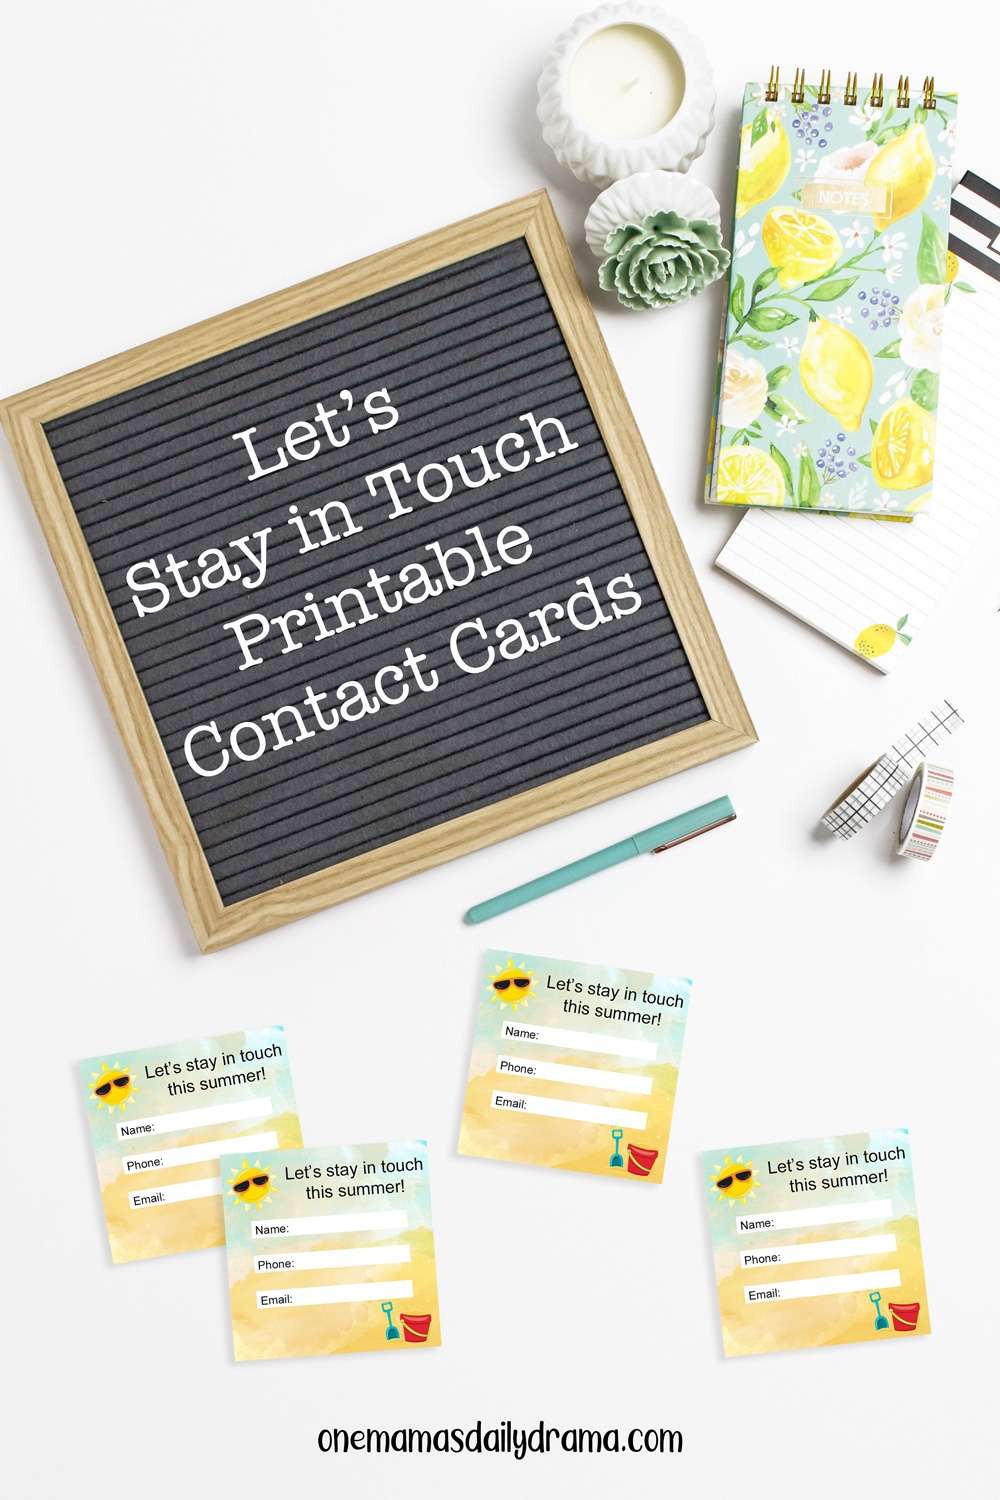 Free Printable Keep In Touch Cards